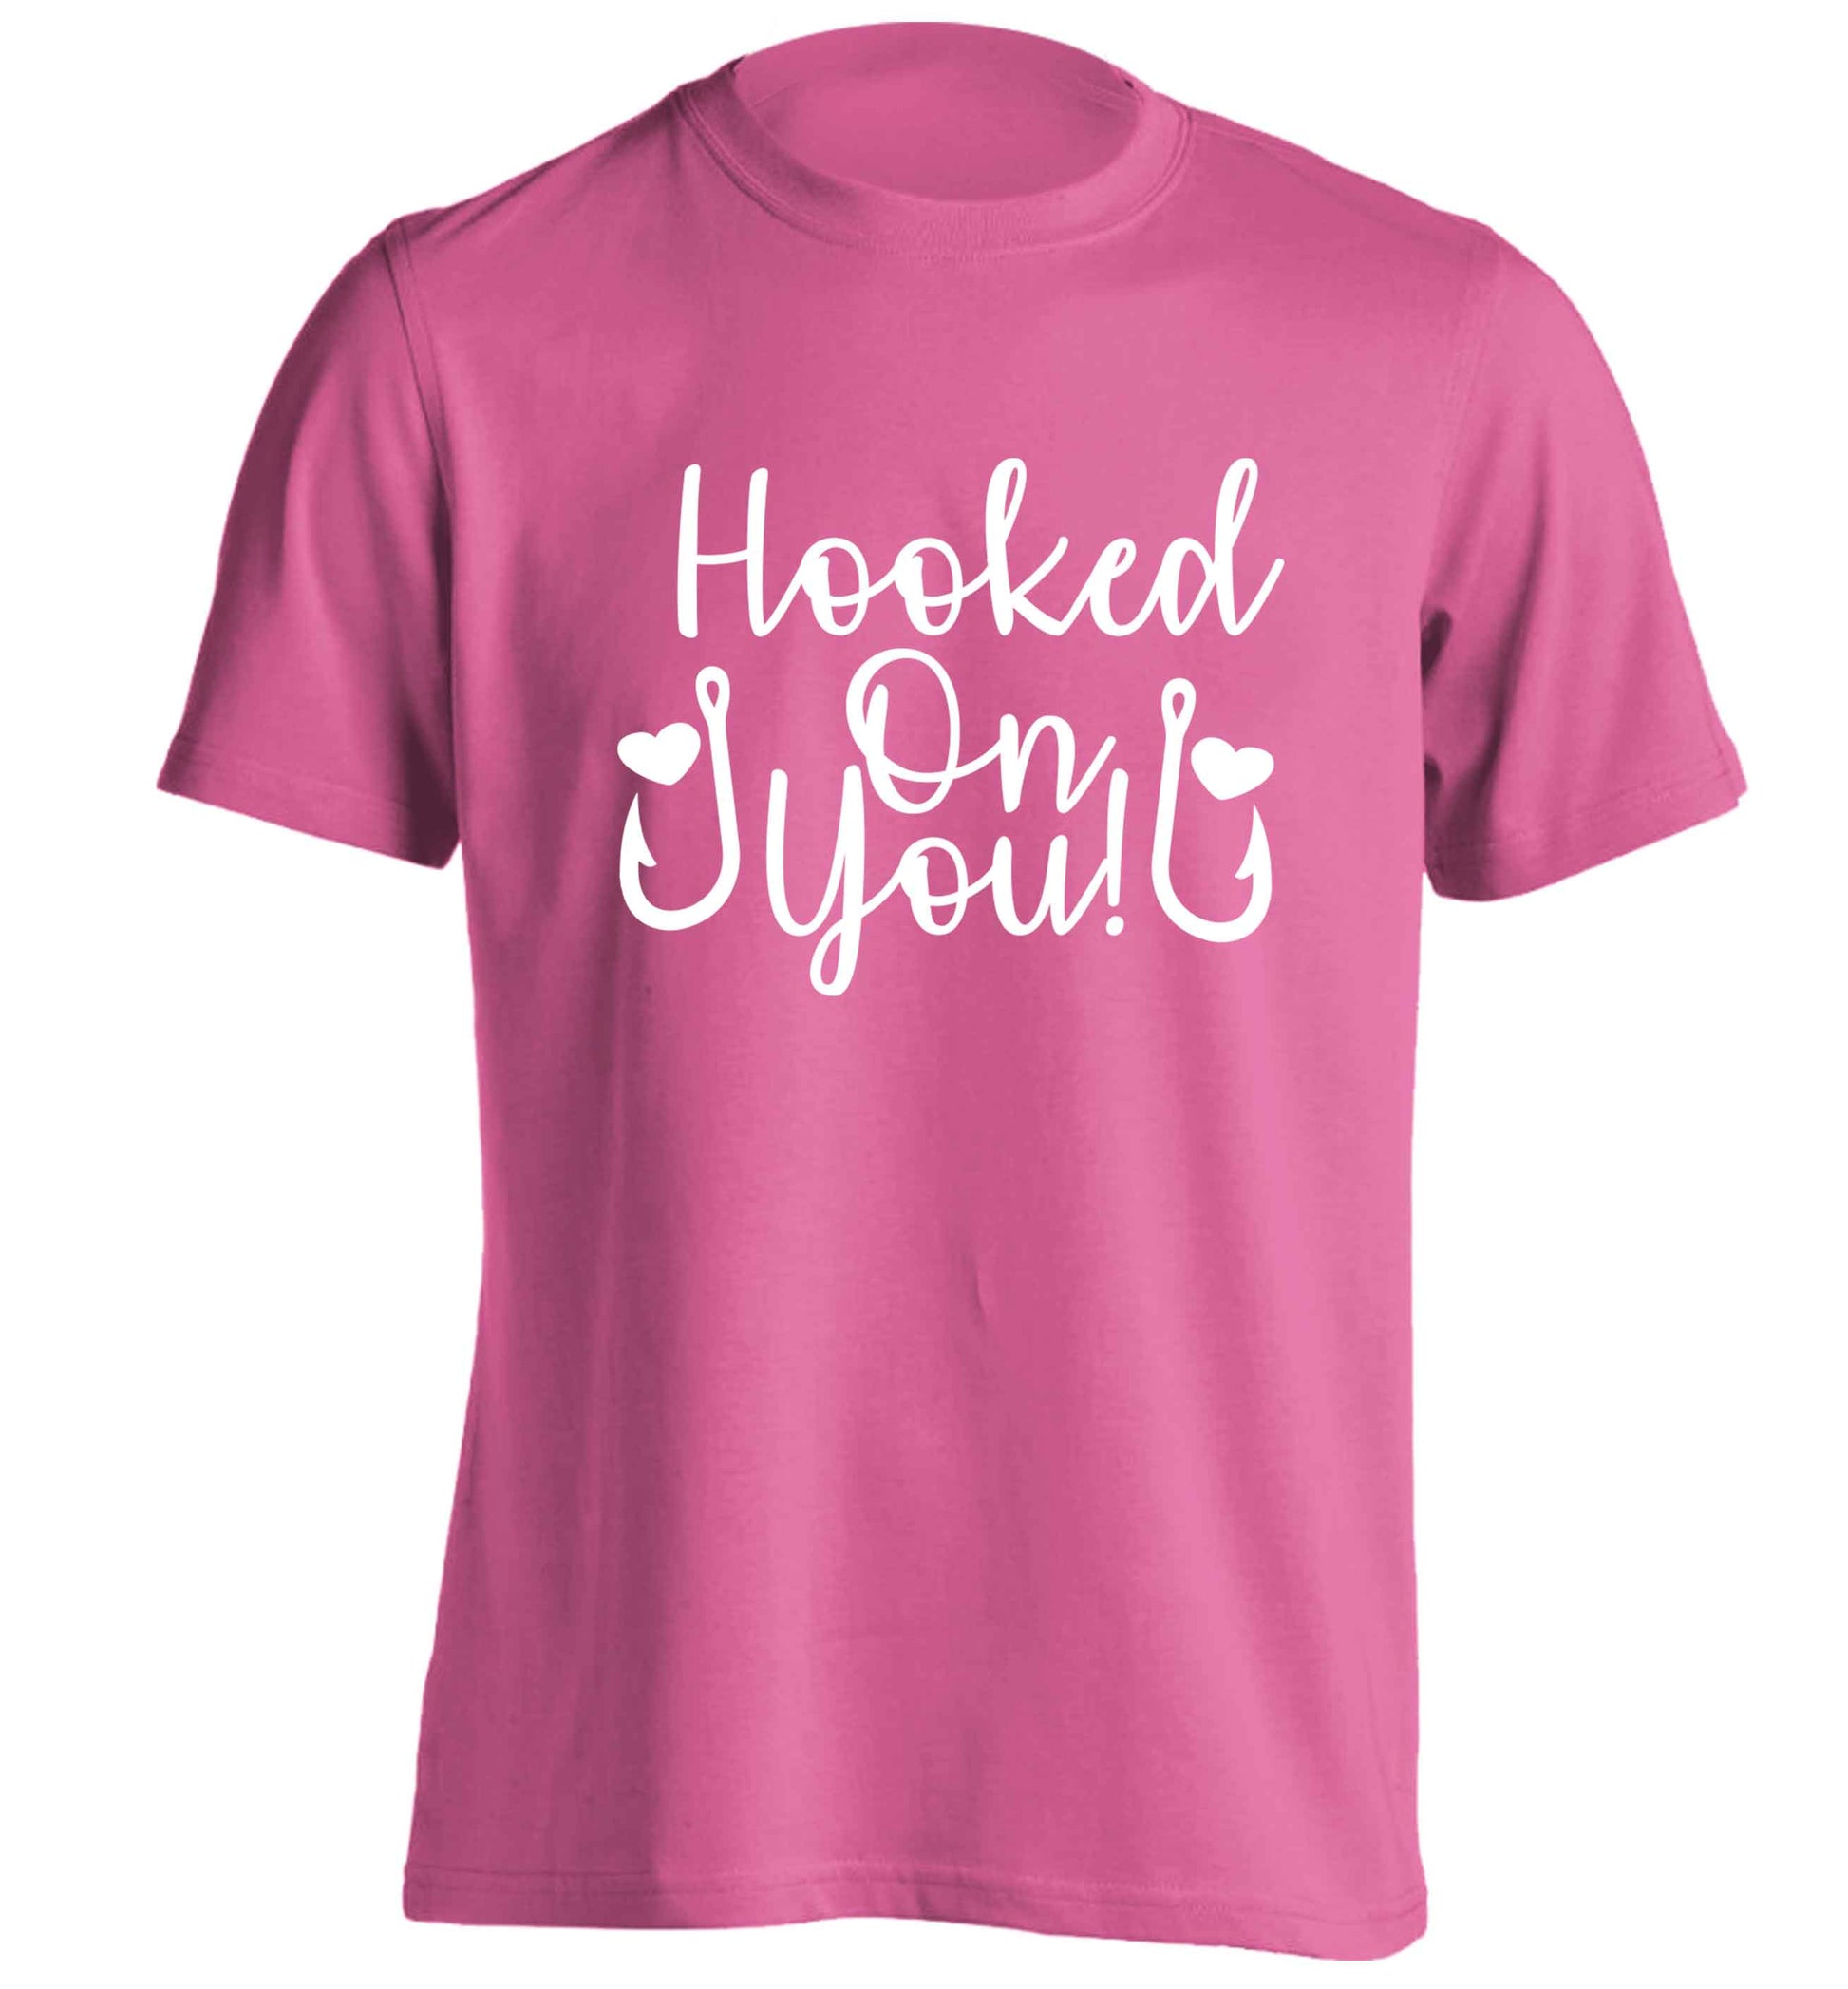 Hooked on you adults unisex pink Tshirt 2XL